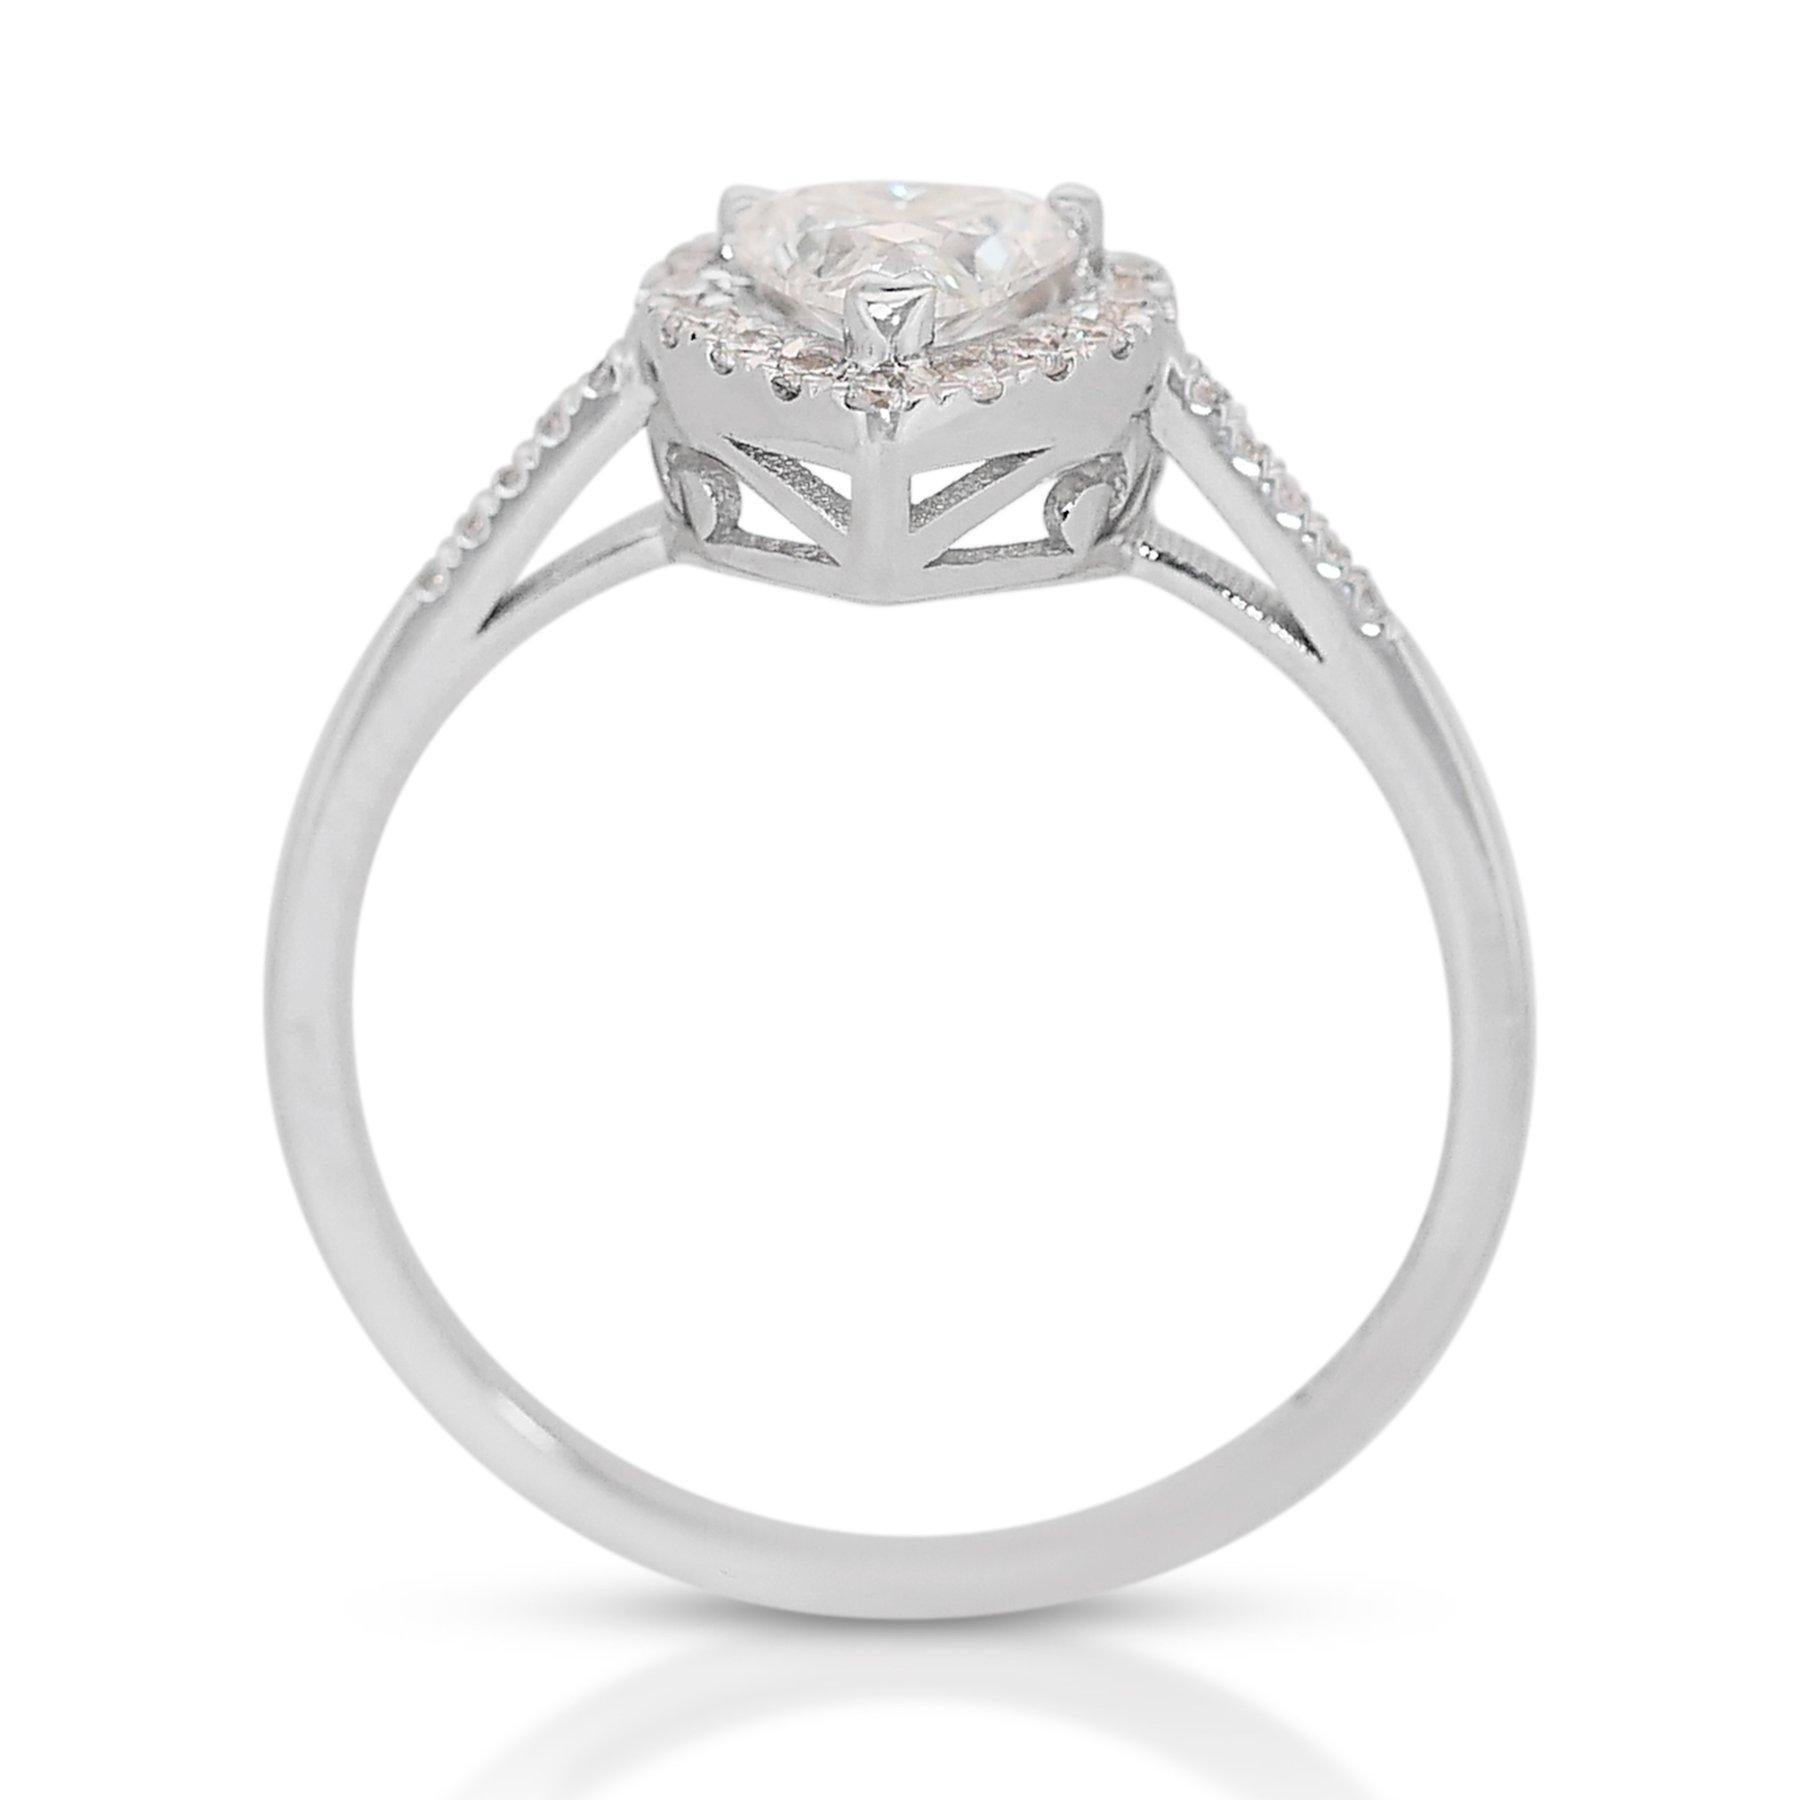 Charming 0.75ct Diamonds Halo Ring in 18k White Gold - IGI Certified For Sale 2